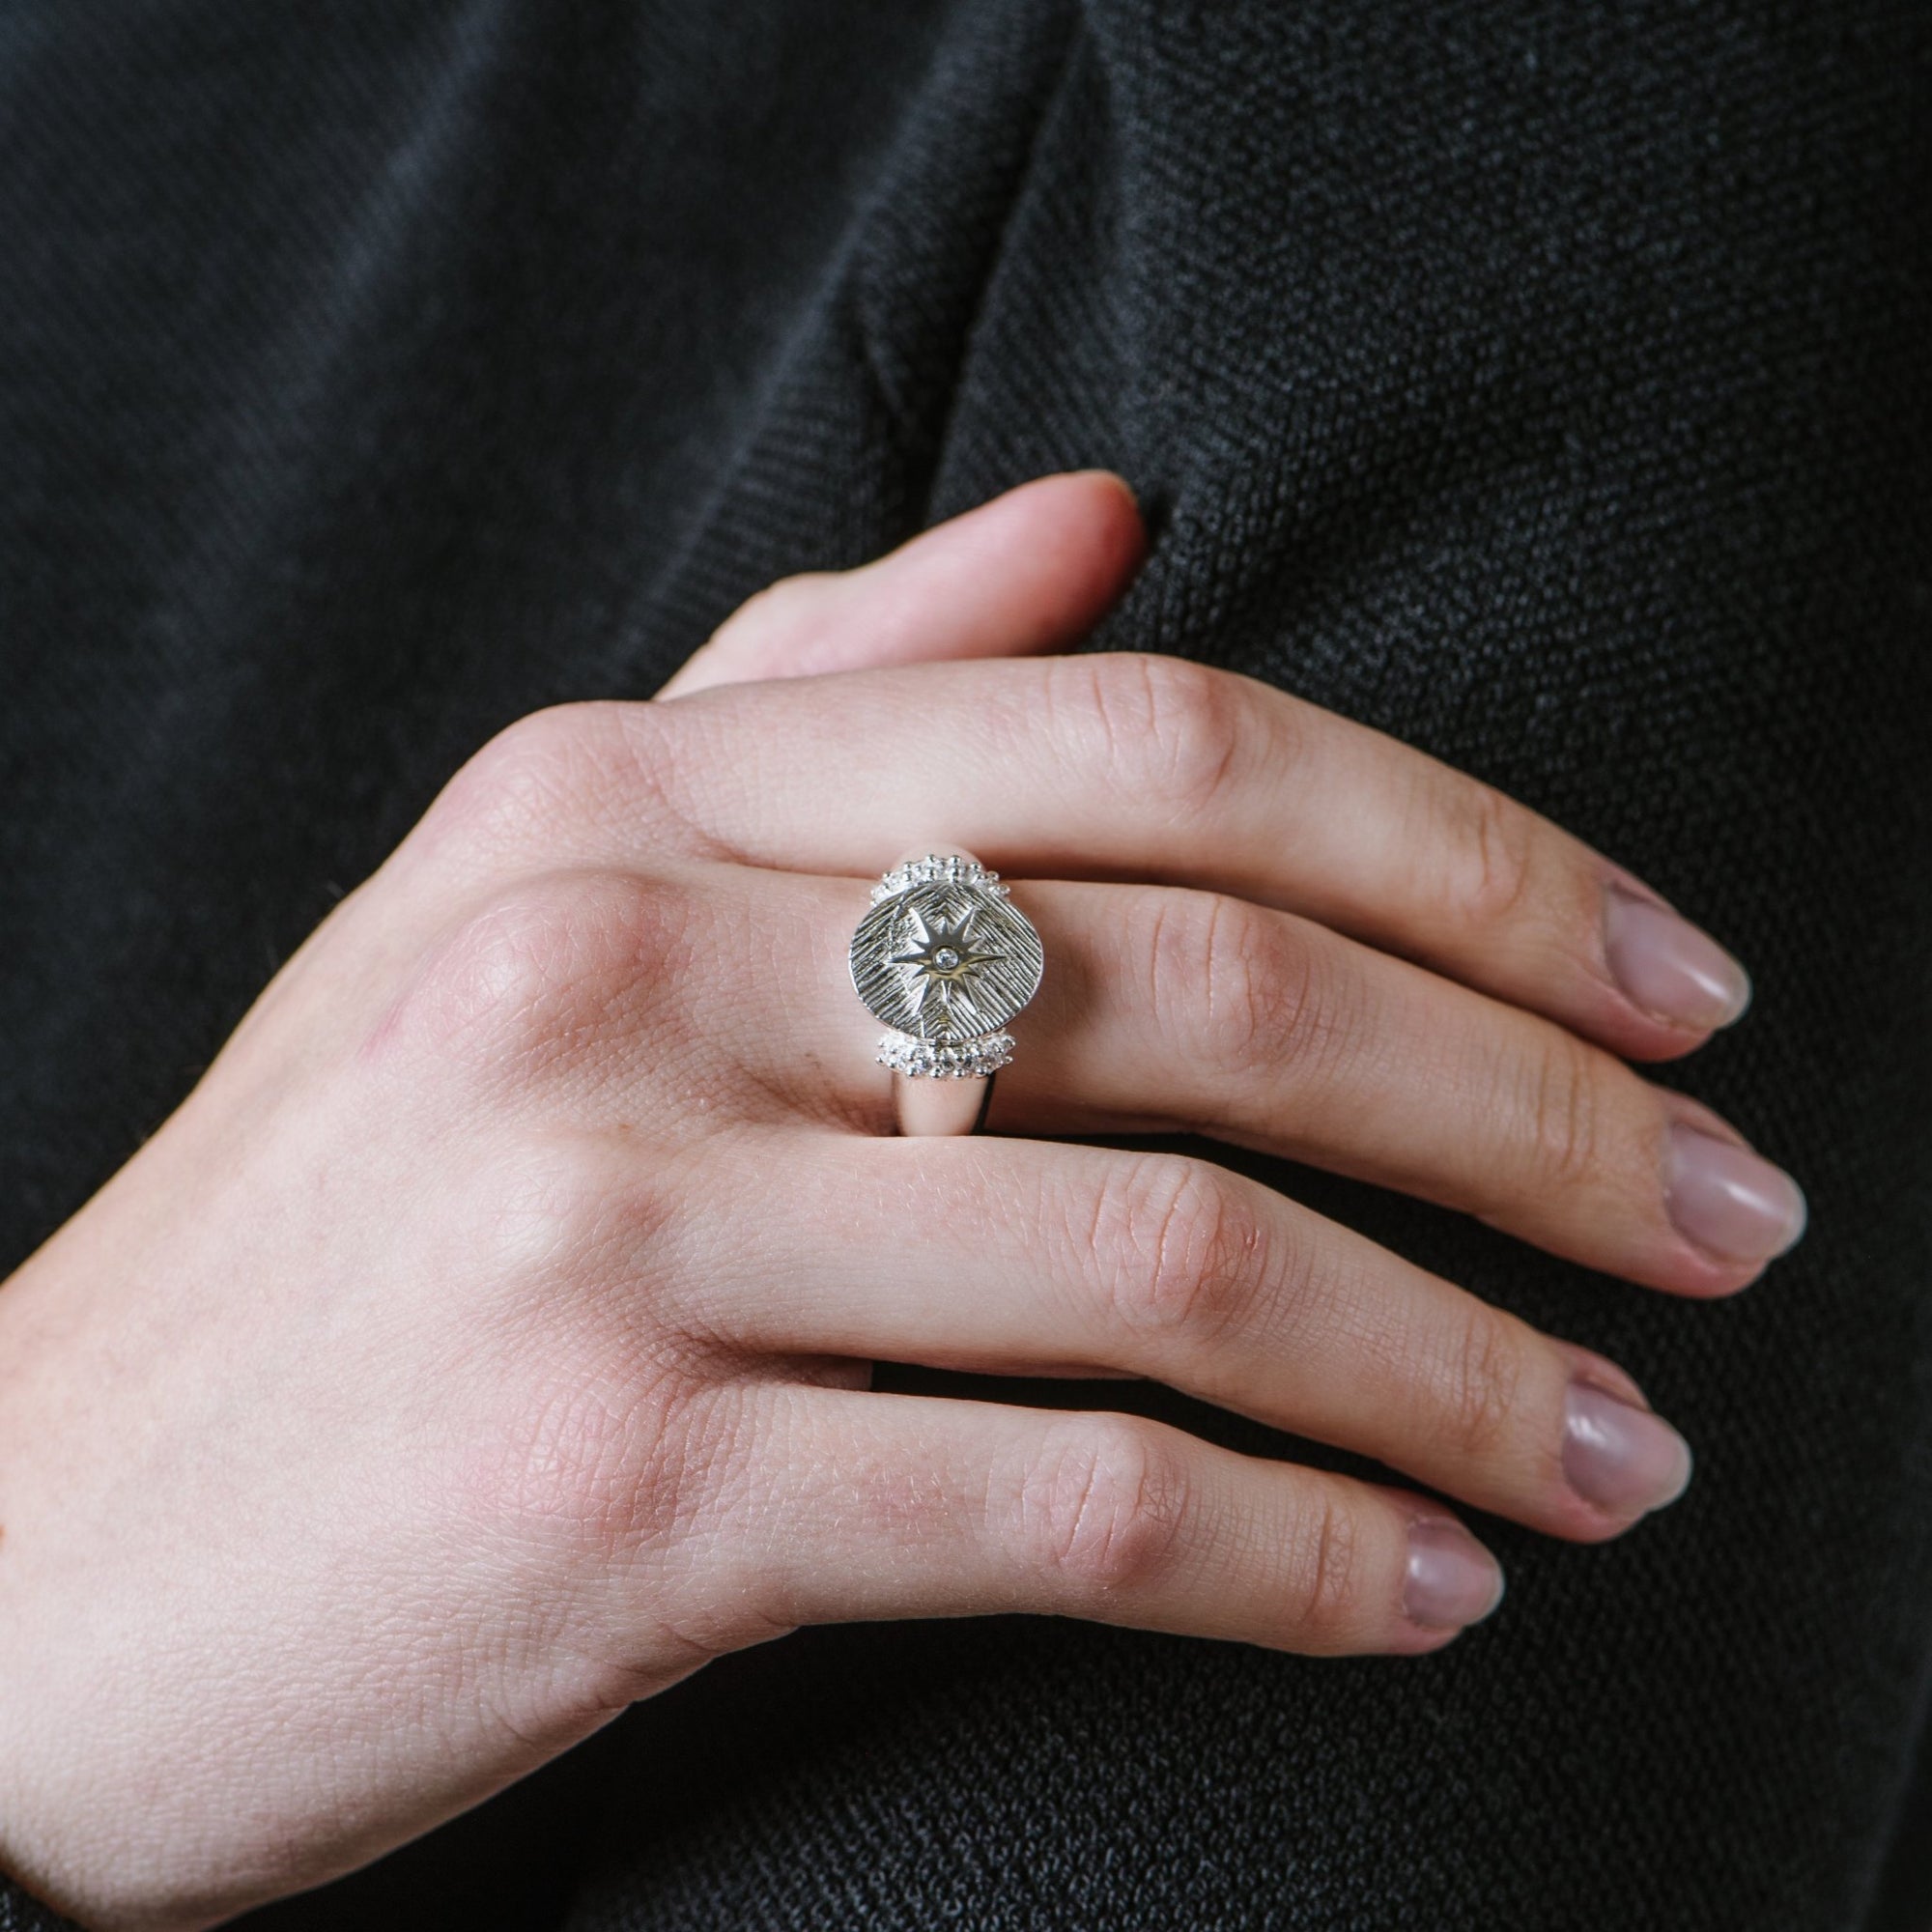 BELIEVE STELLAR COCKTAIL RING - CUBIC ZIRCONIA & SILVER - SO PRETTY CARA COTTER